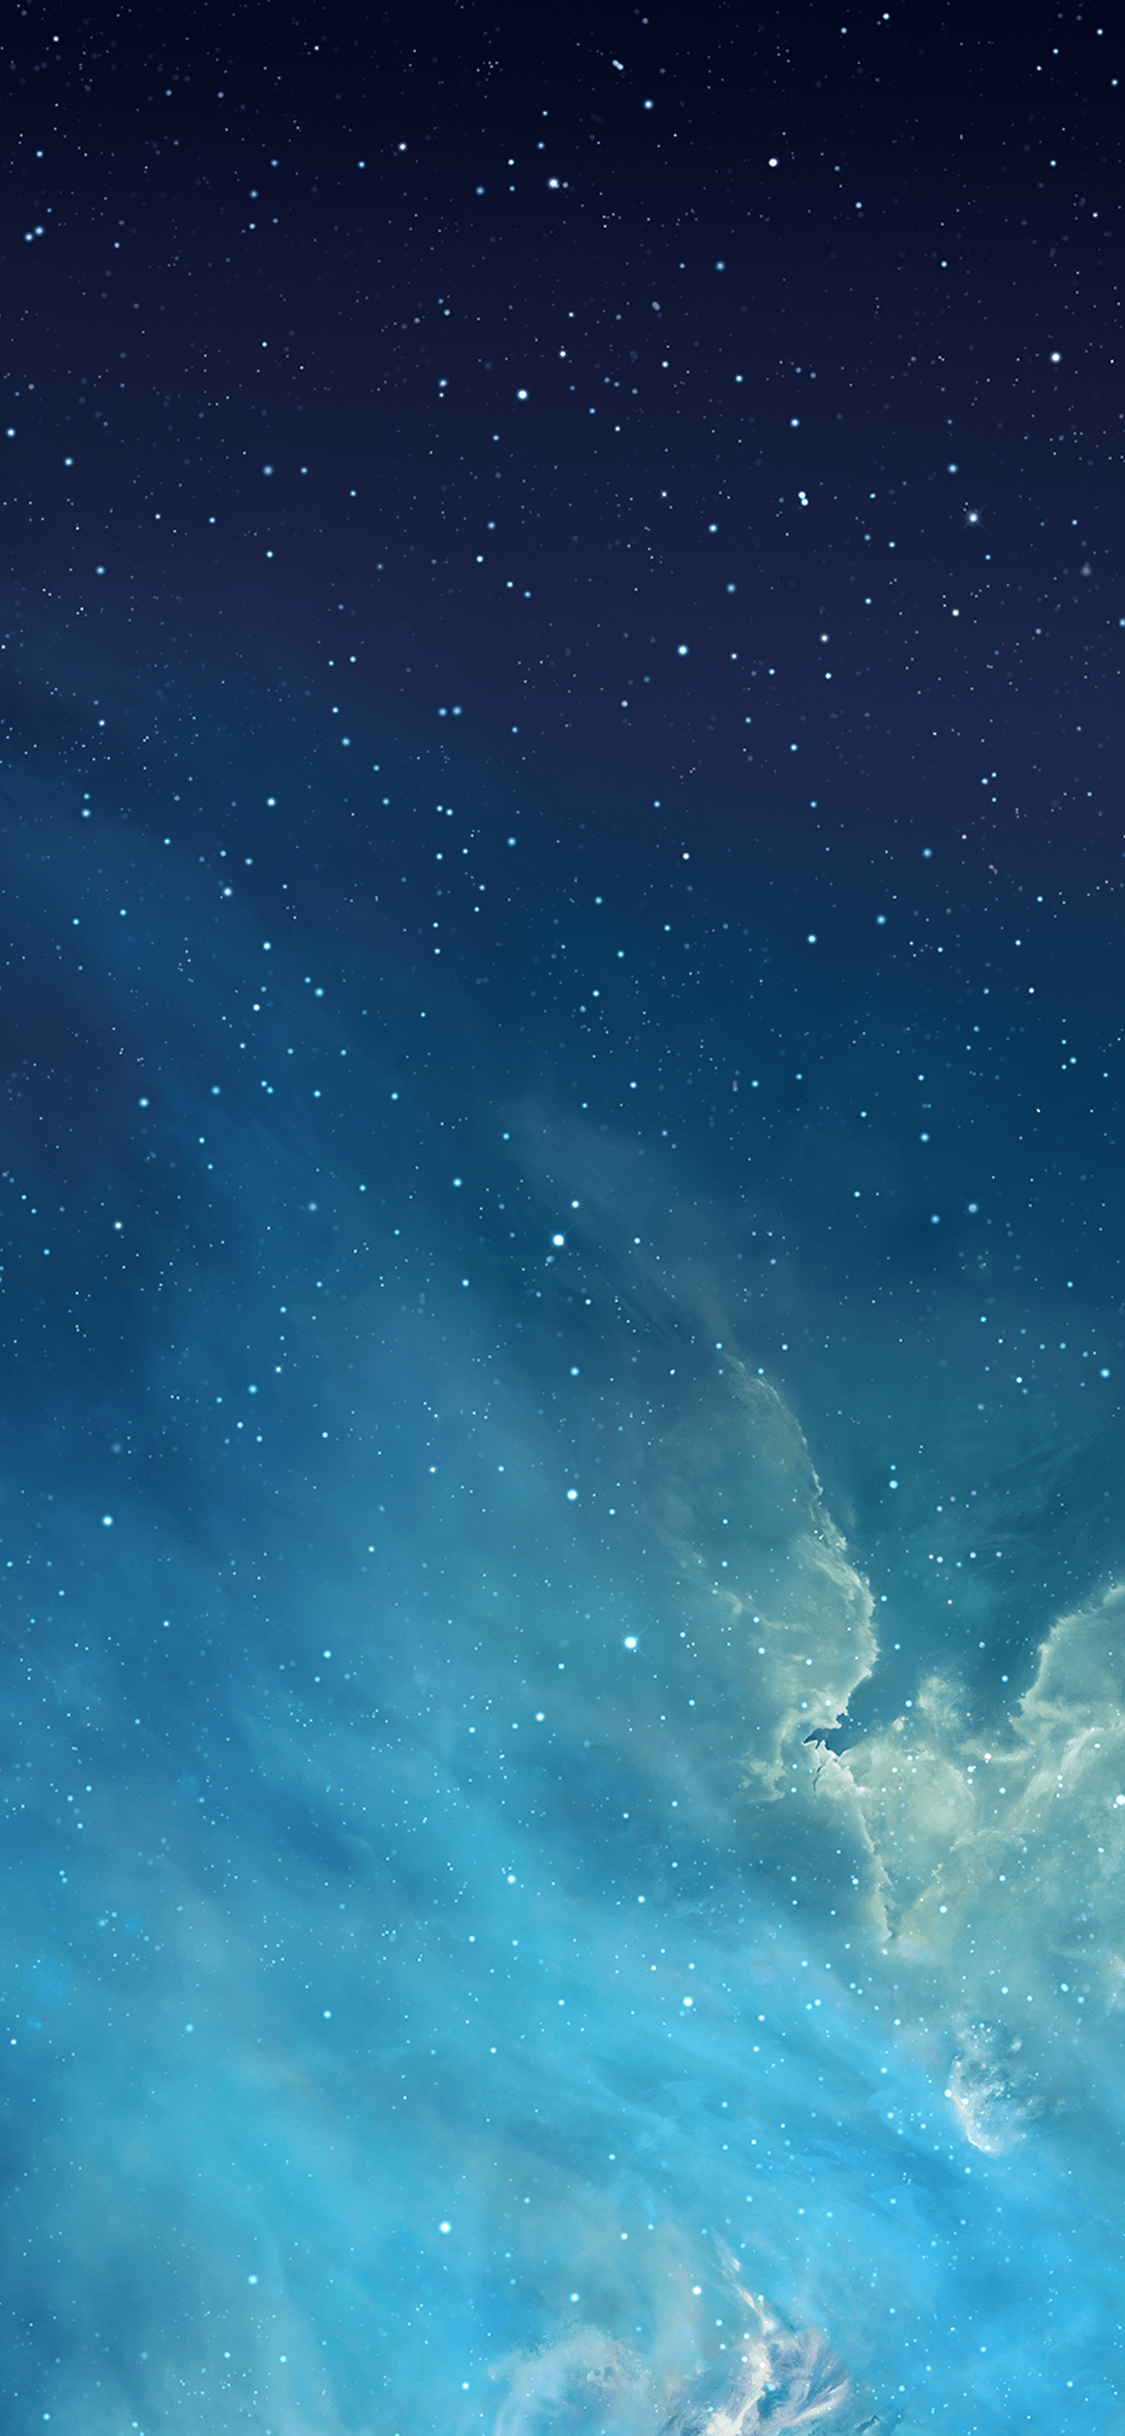 4K Quality Iphone Wallpapers